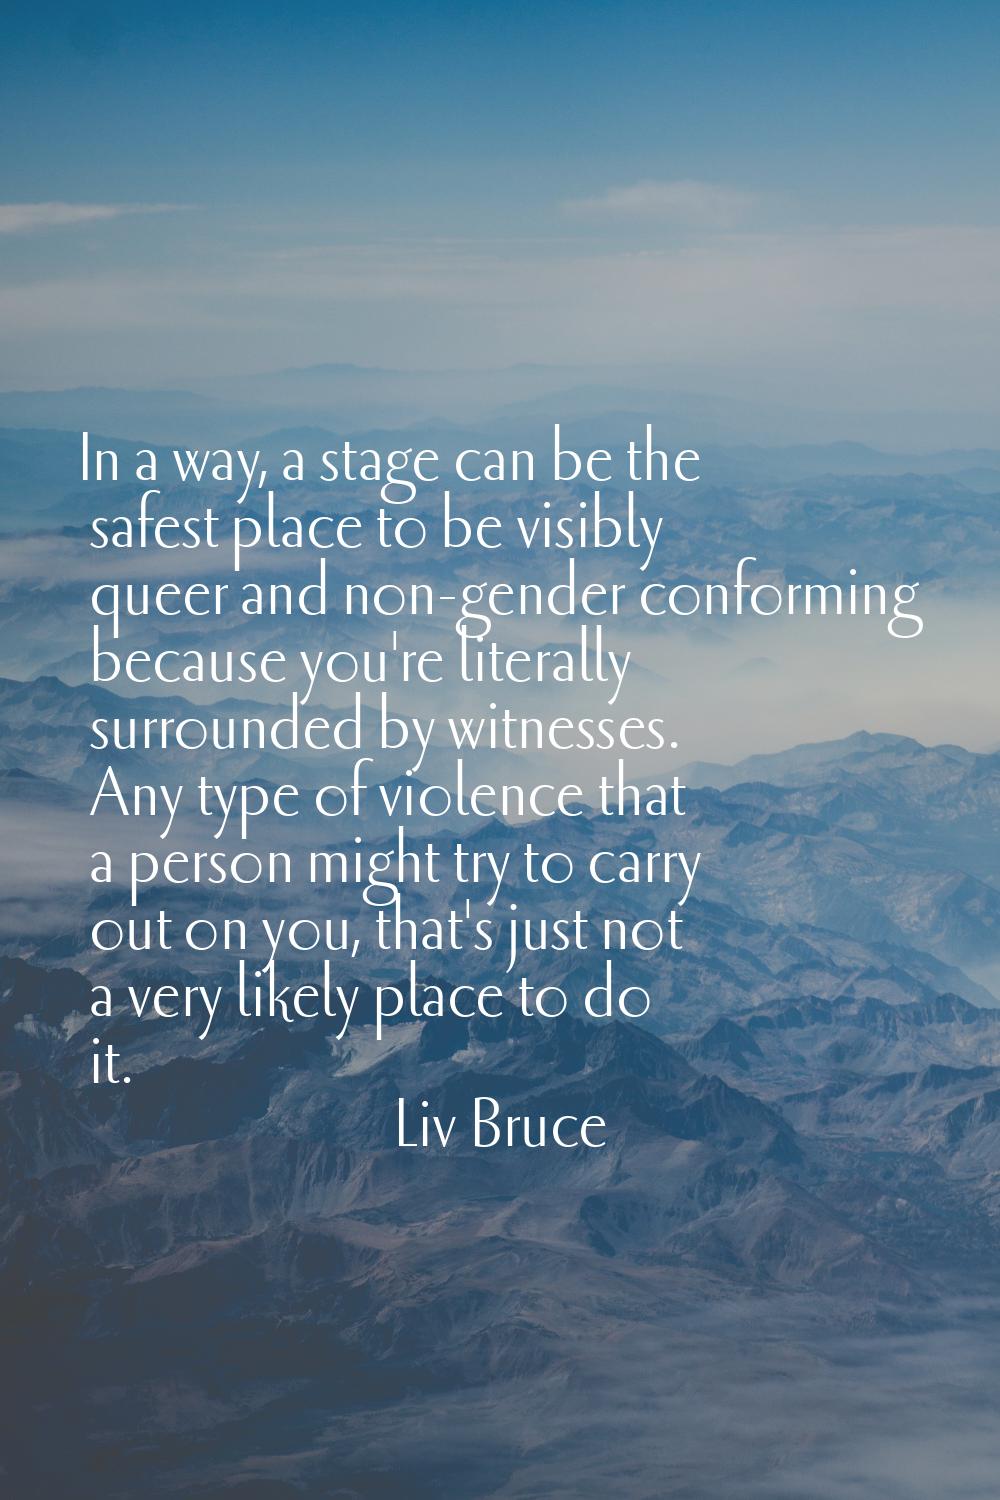 In a way, a stage can be the safest place to be visibly queer and non-gender conforming because you